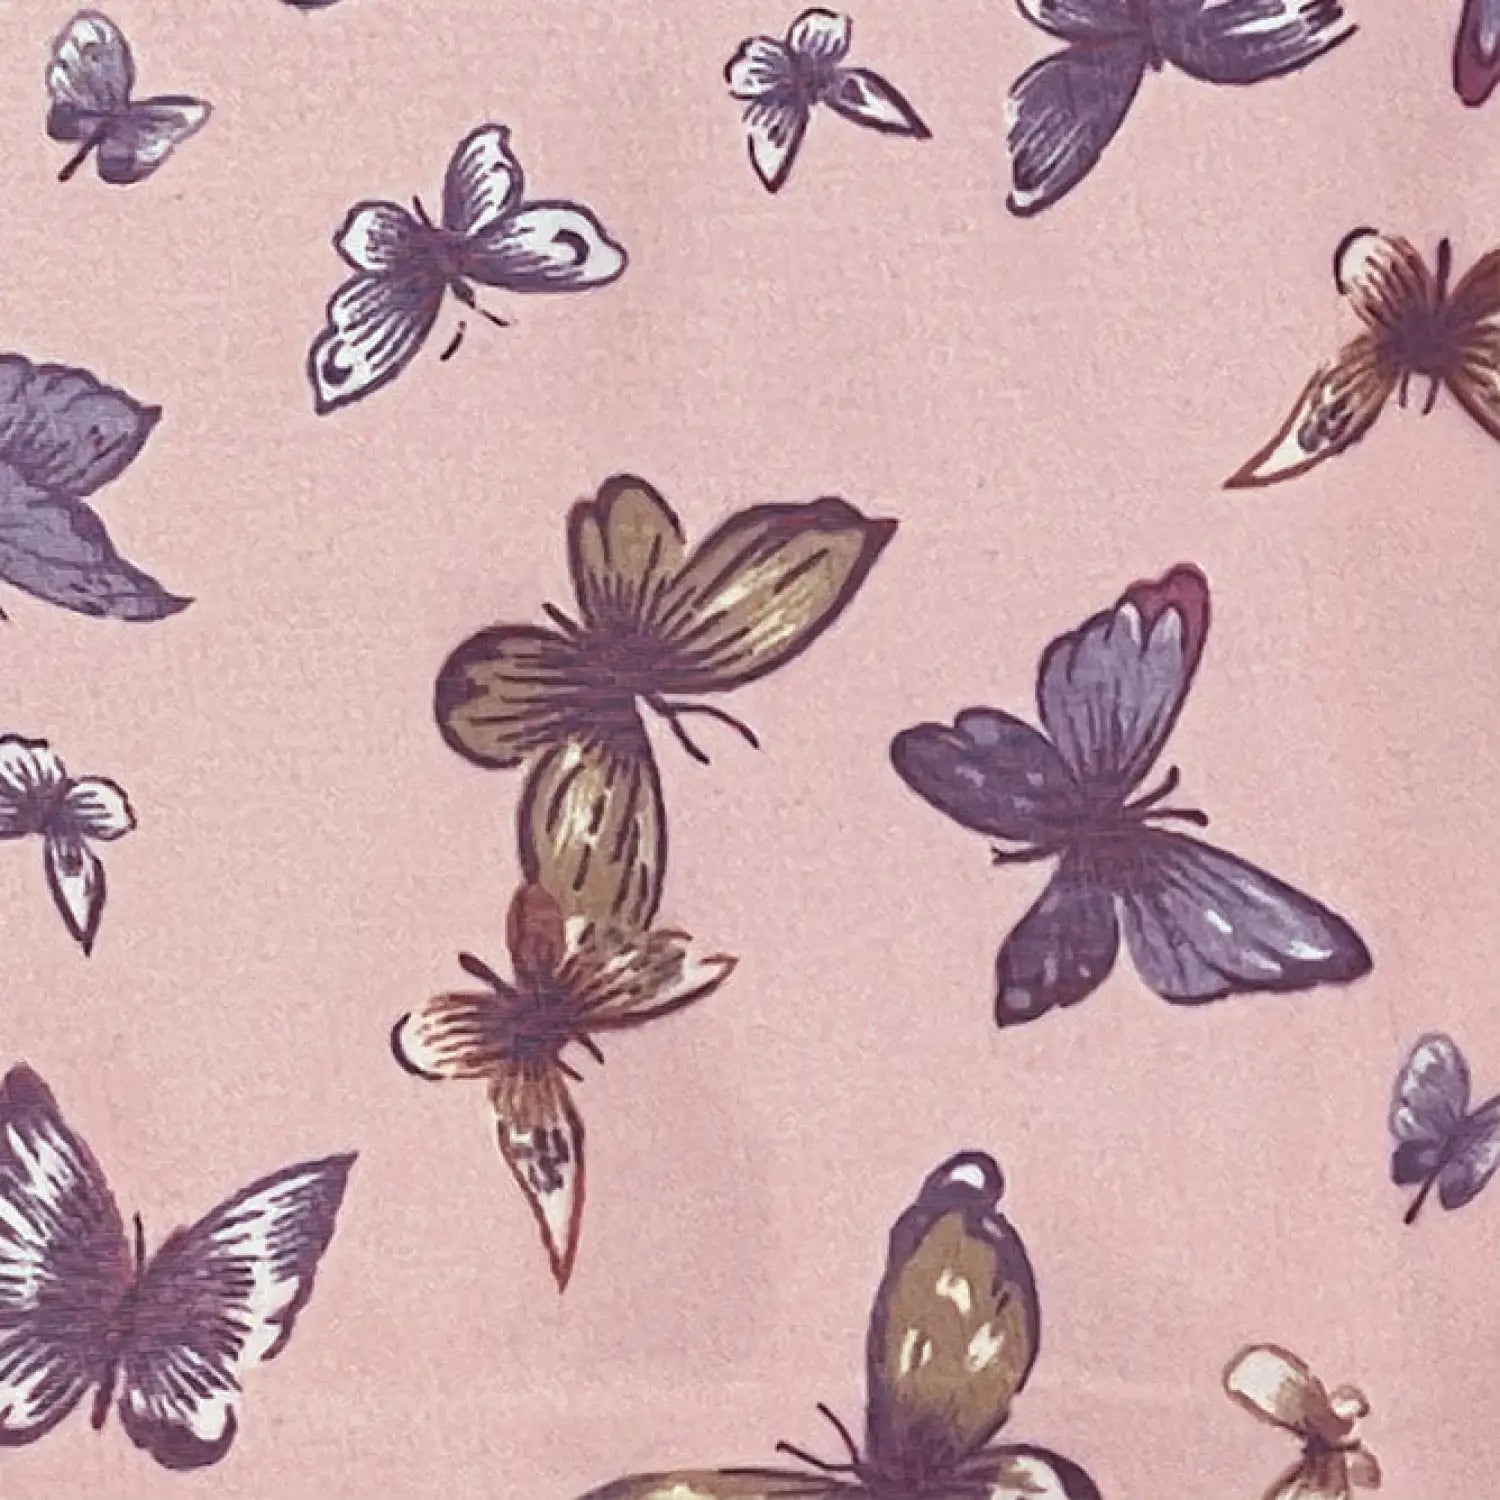 Butterfly print scarf on pink background with butterflies